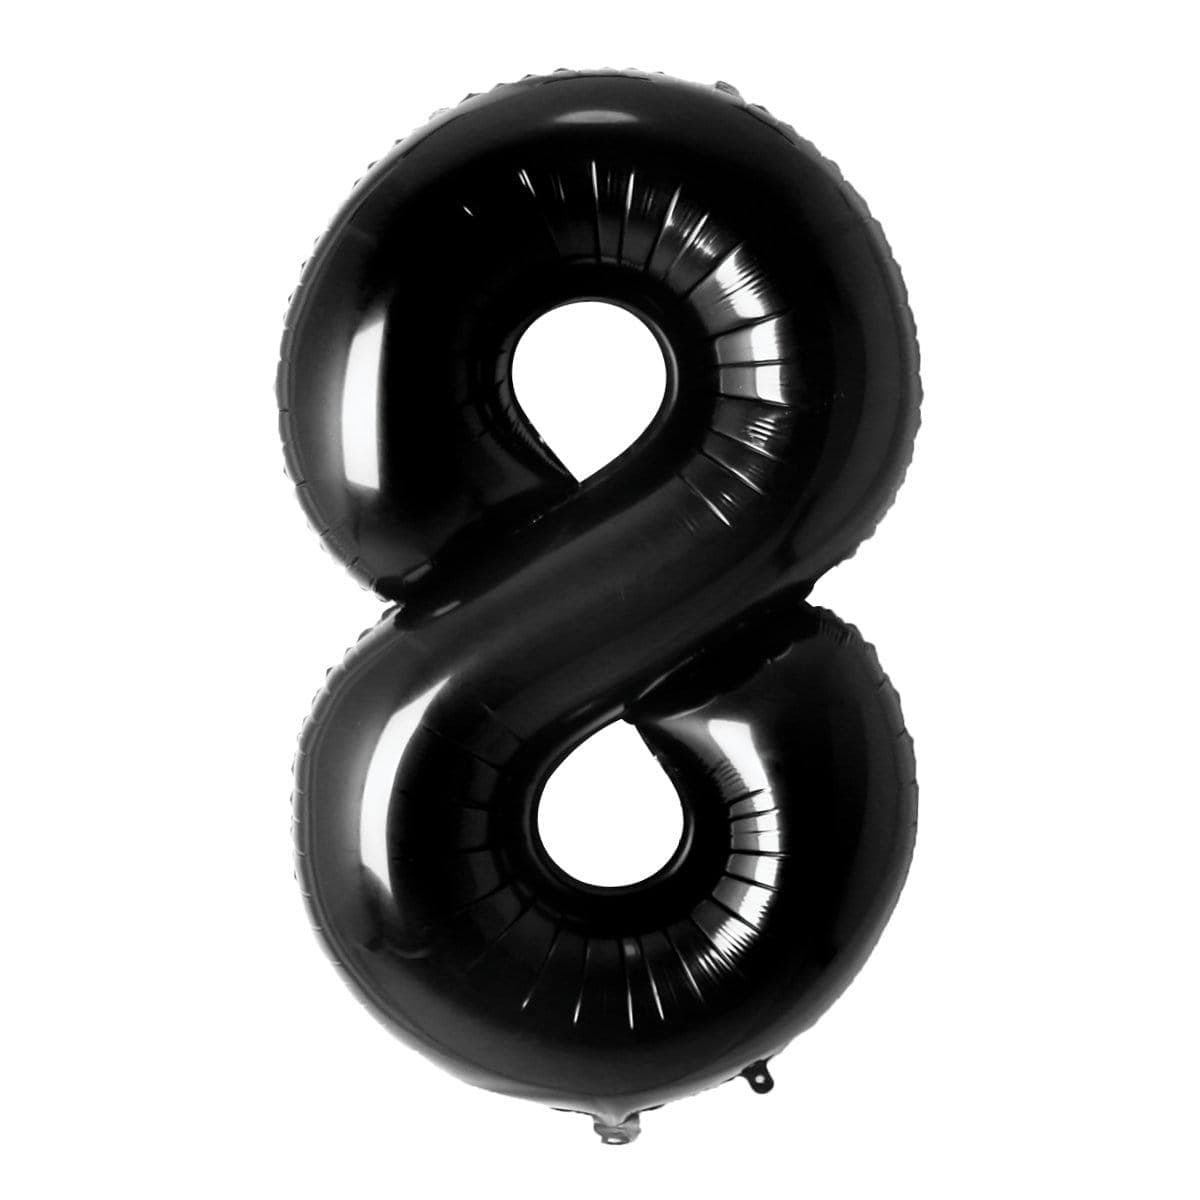 Buy Balloons Black Number 8 Foil Balloon, 34 Inches sold at Party Expert